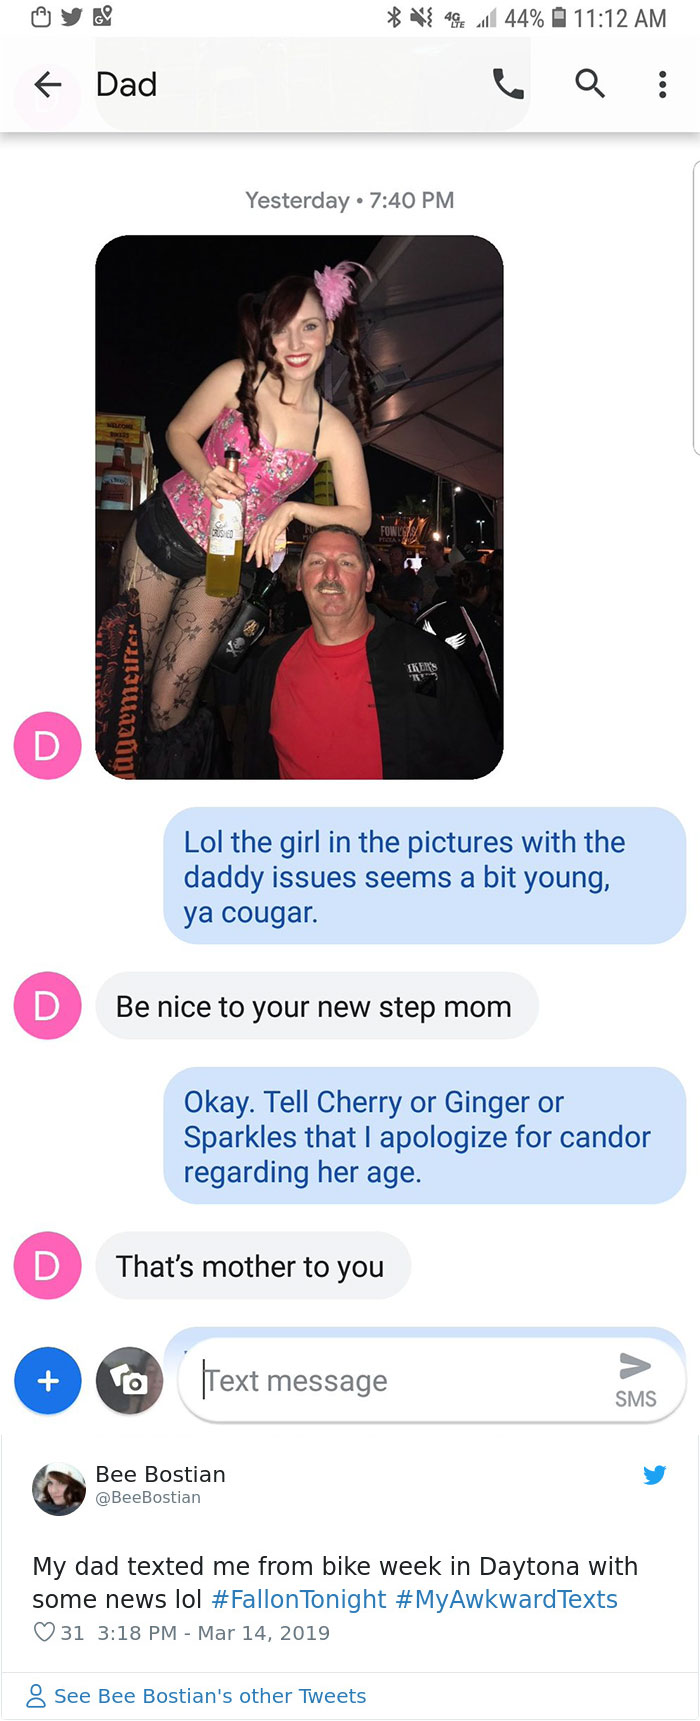 awkward texts - } 49 l 44% { Dad Q Yesterday agermeiter Lol the girl in the pictures with the daddy issues seems a bit young, ya cougar. Be nice to your new step mom Okay. Tell Cherry or Ginger or Sparkles that I apologize for candor regarding her age. Th